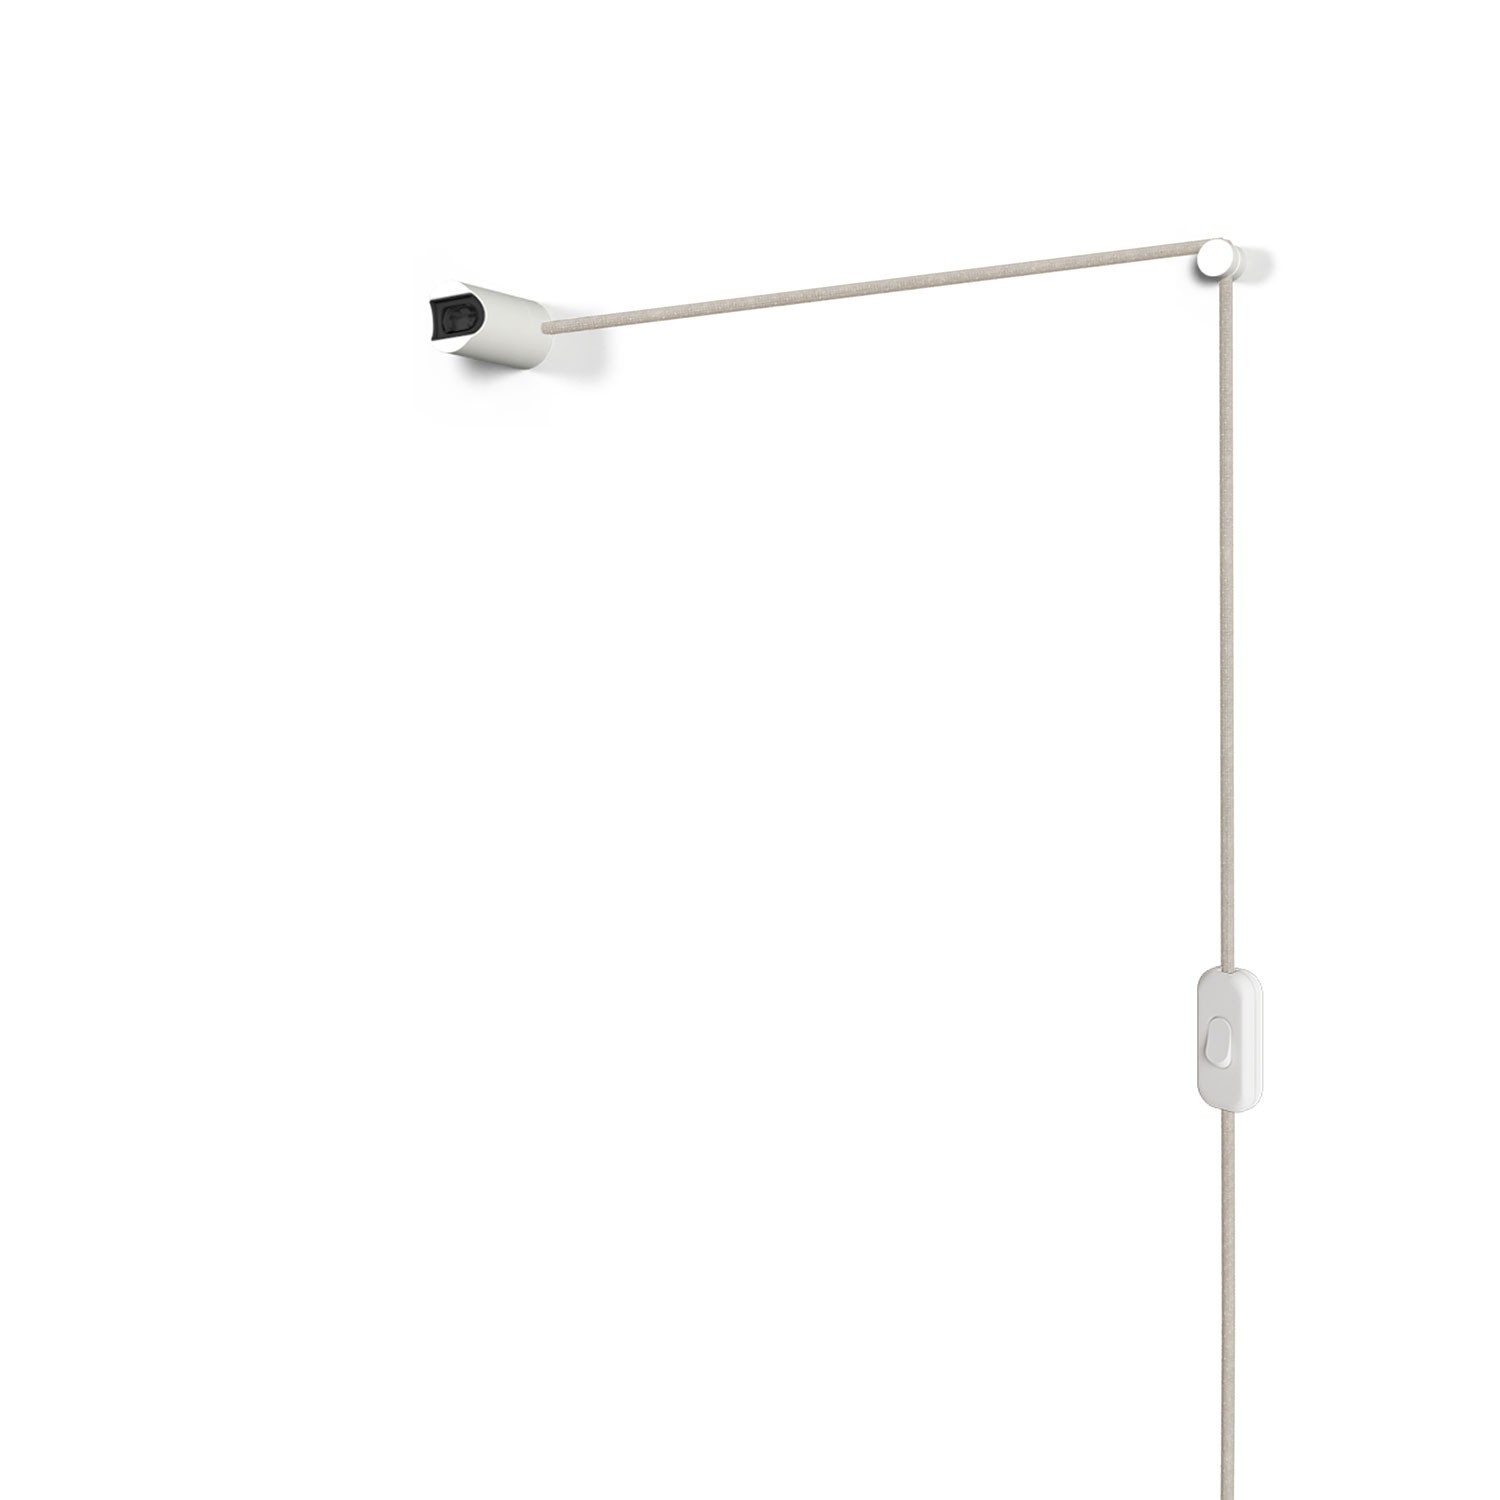 Spostaluce esse14 lamp with S14d fitting and two-pin plug